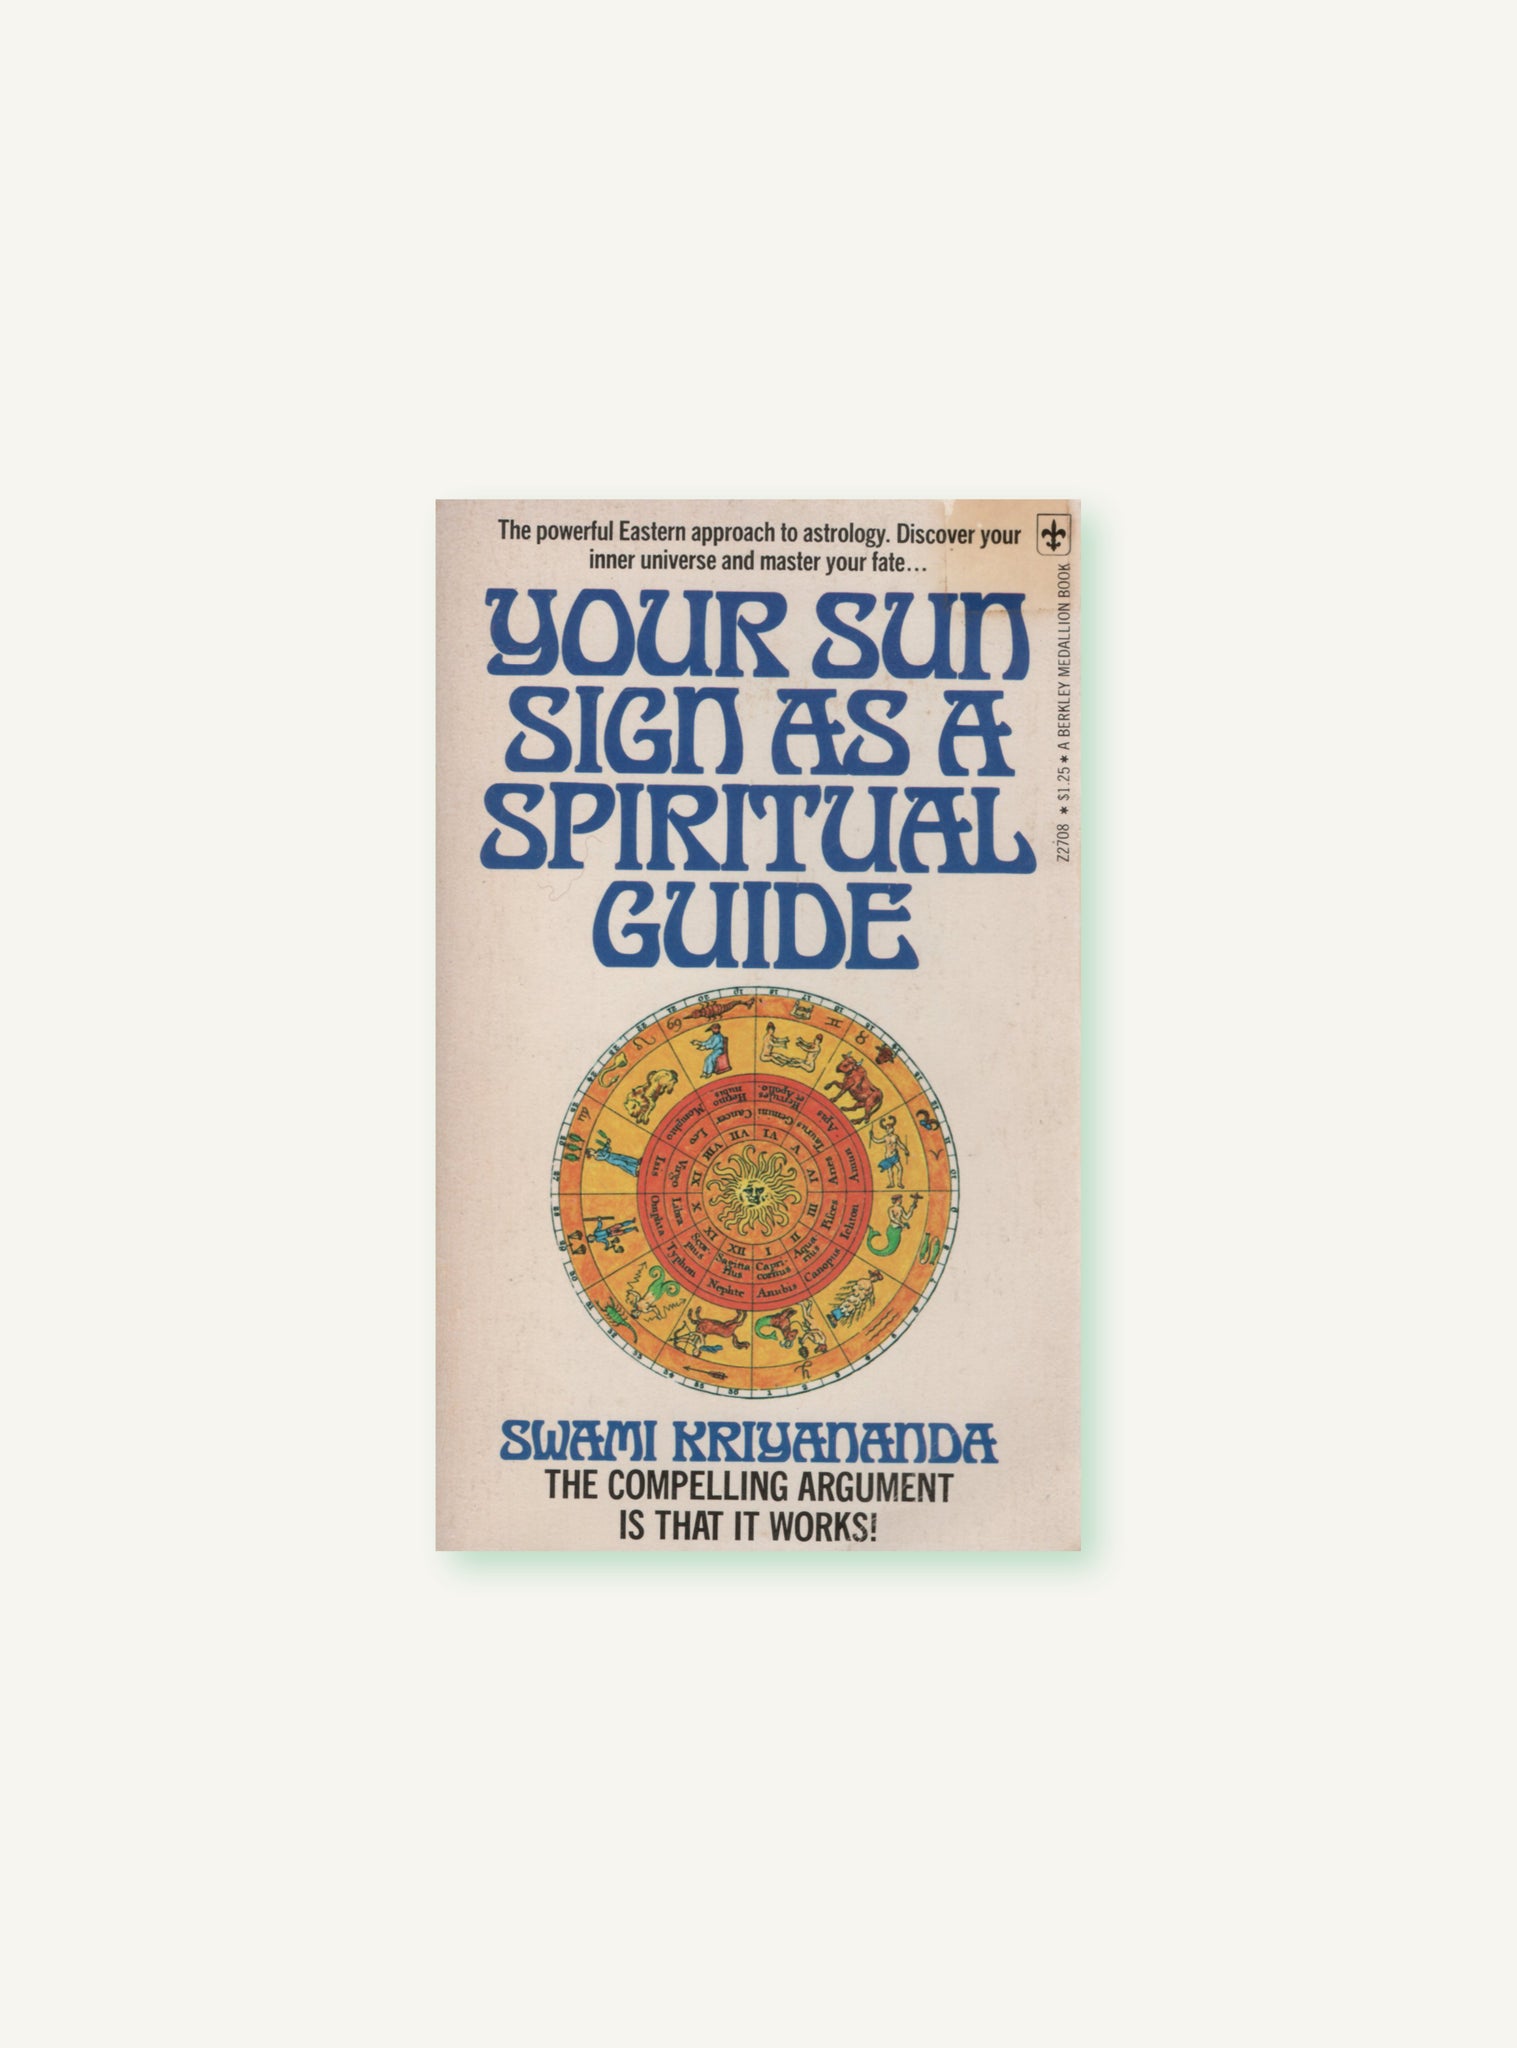 Your Sun Sign As a Spiritual Guide Book by Swami Kriyananda